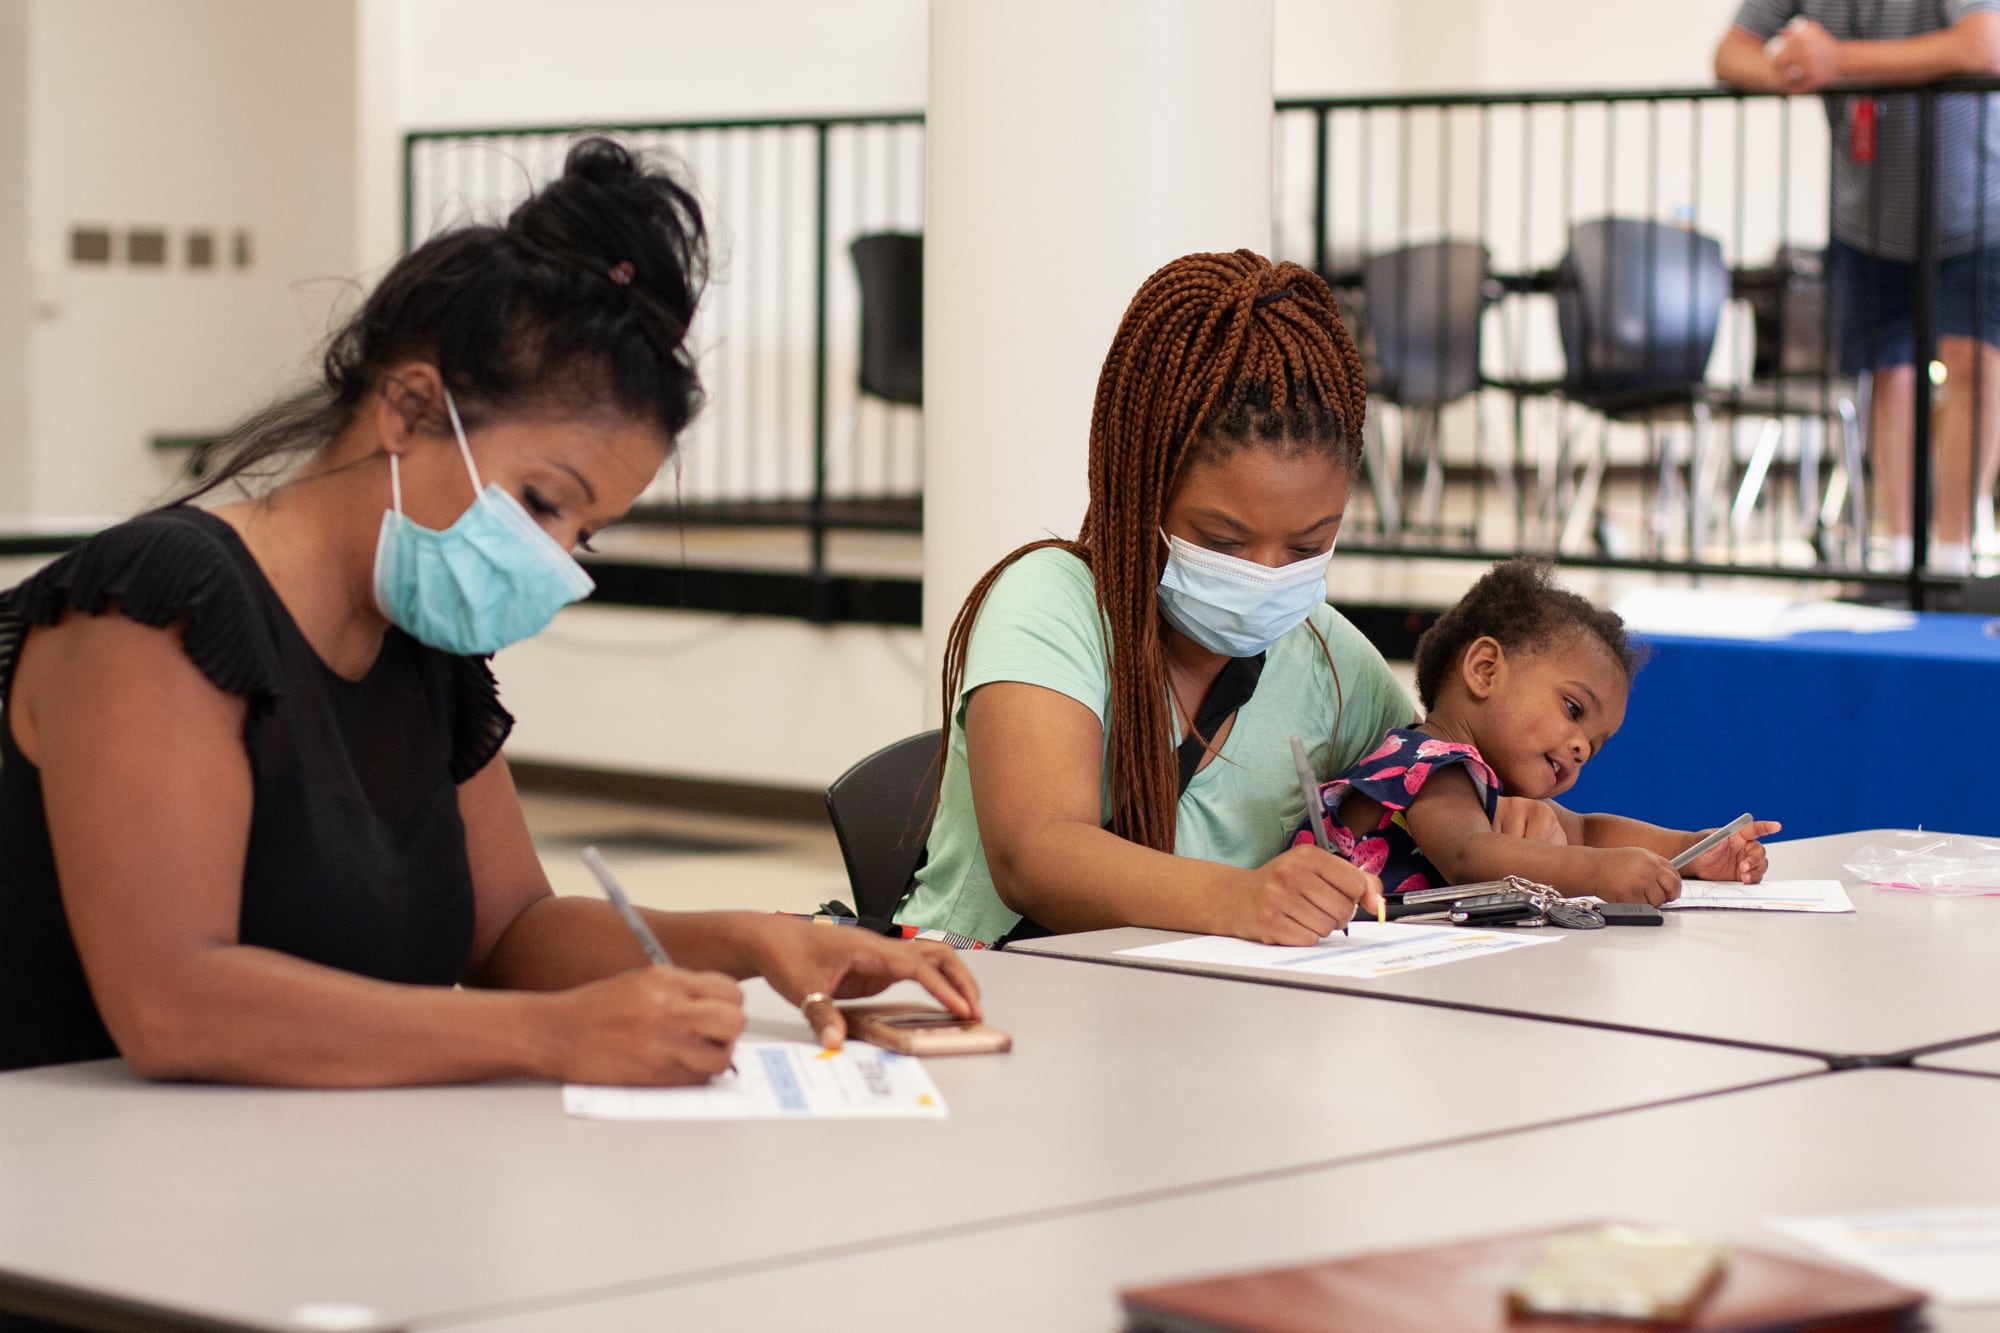 A woman in a black shirt wearing a blue face mask with her hair in a bun and a woman in a teal shirt with a blue face mask holding a distracted young child on her lap sit at a table and write on pieces of paper.